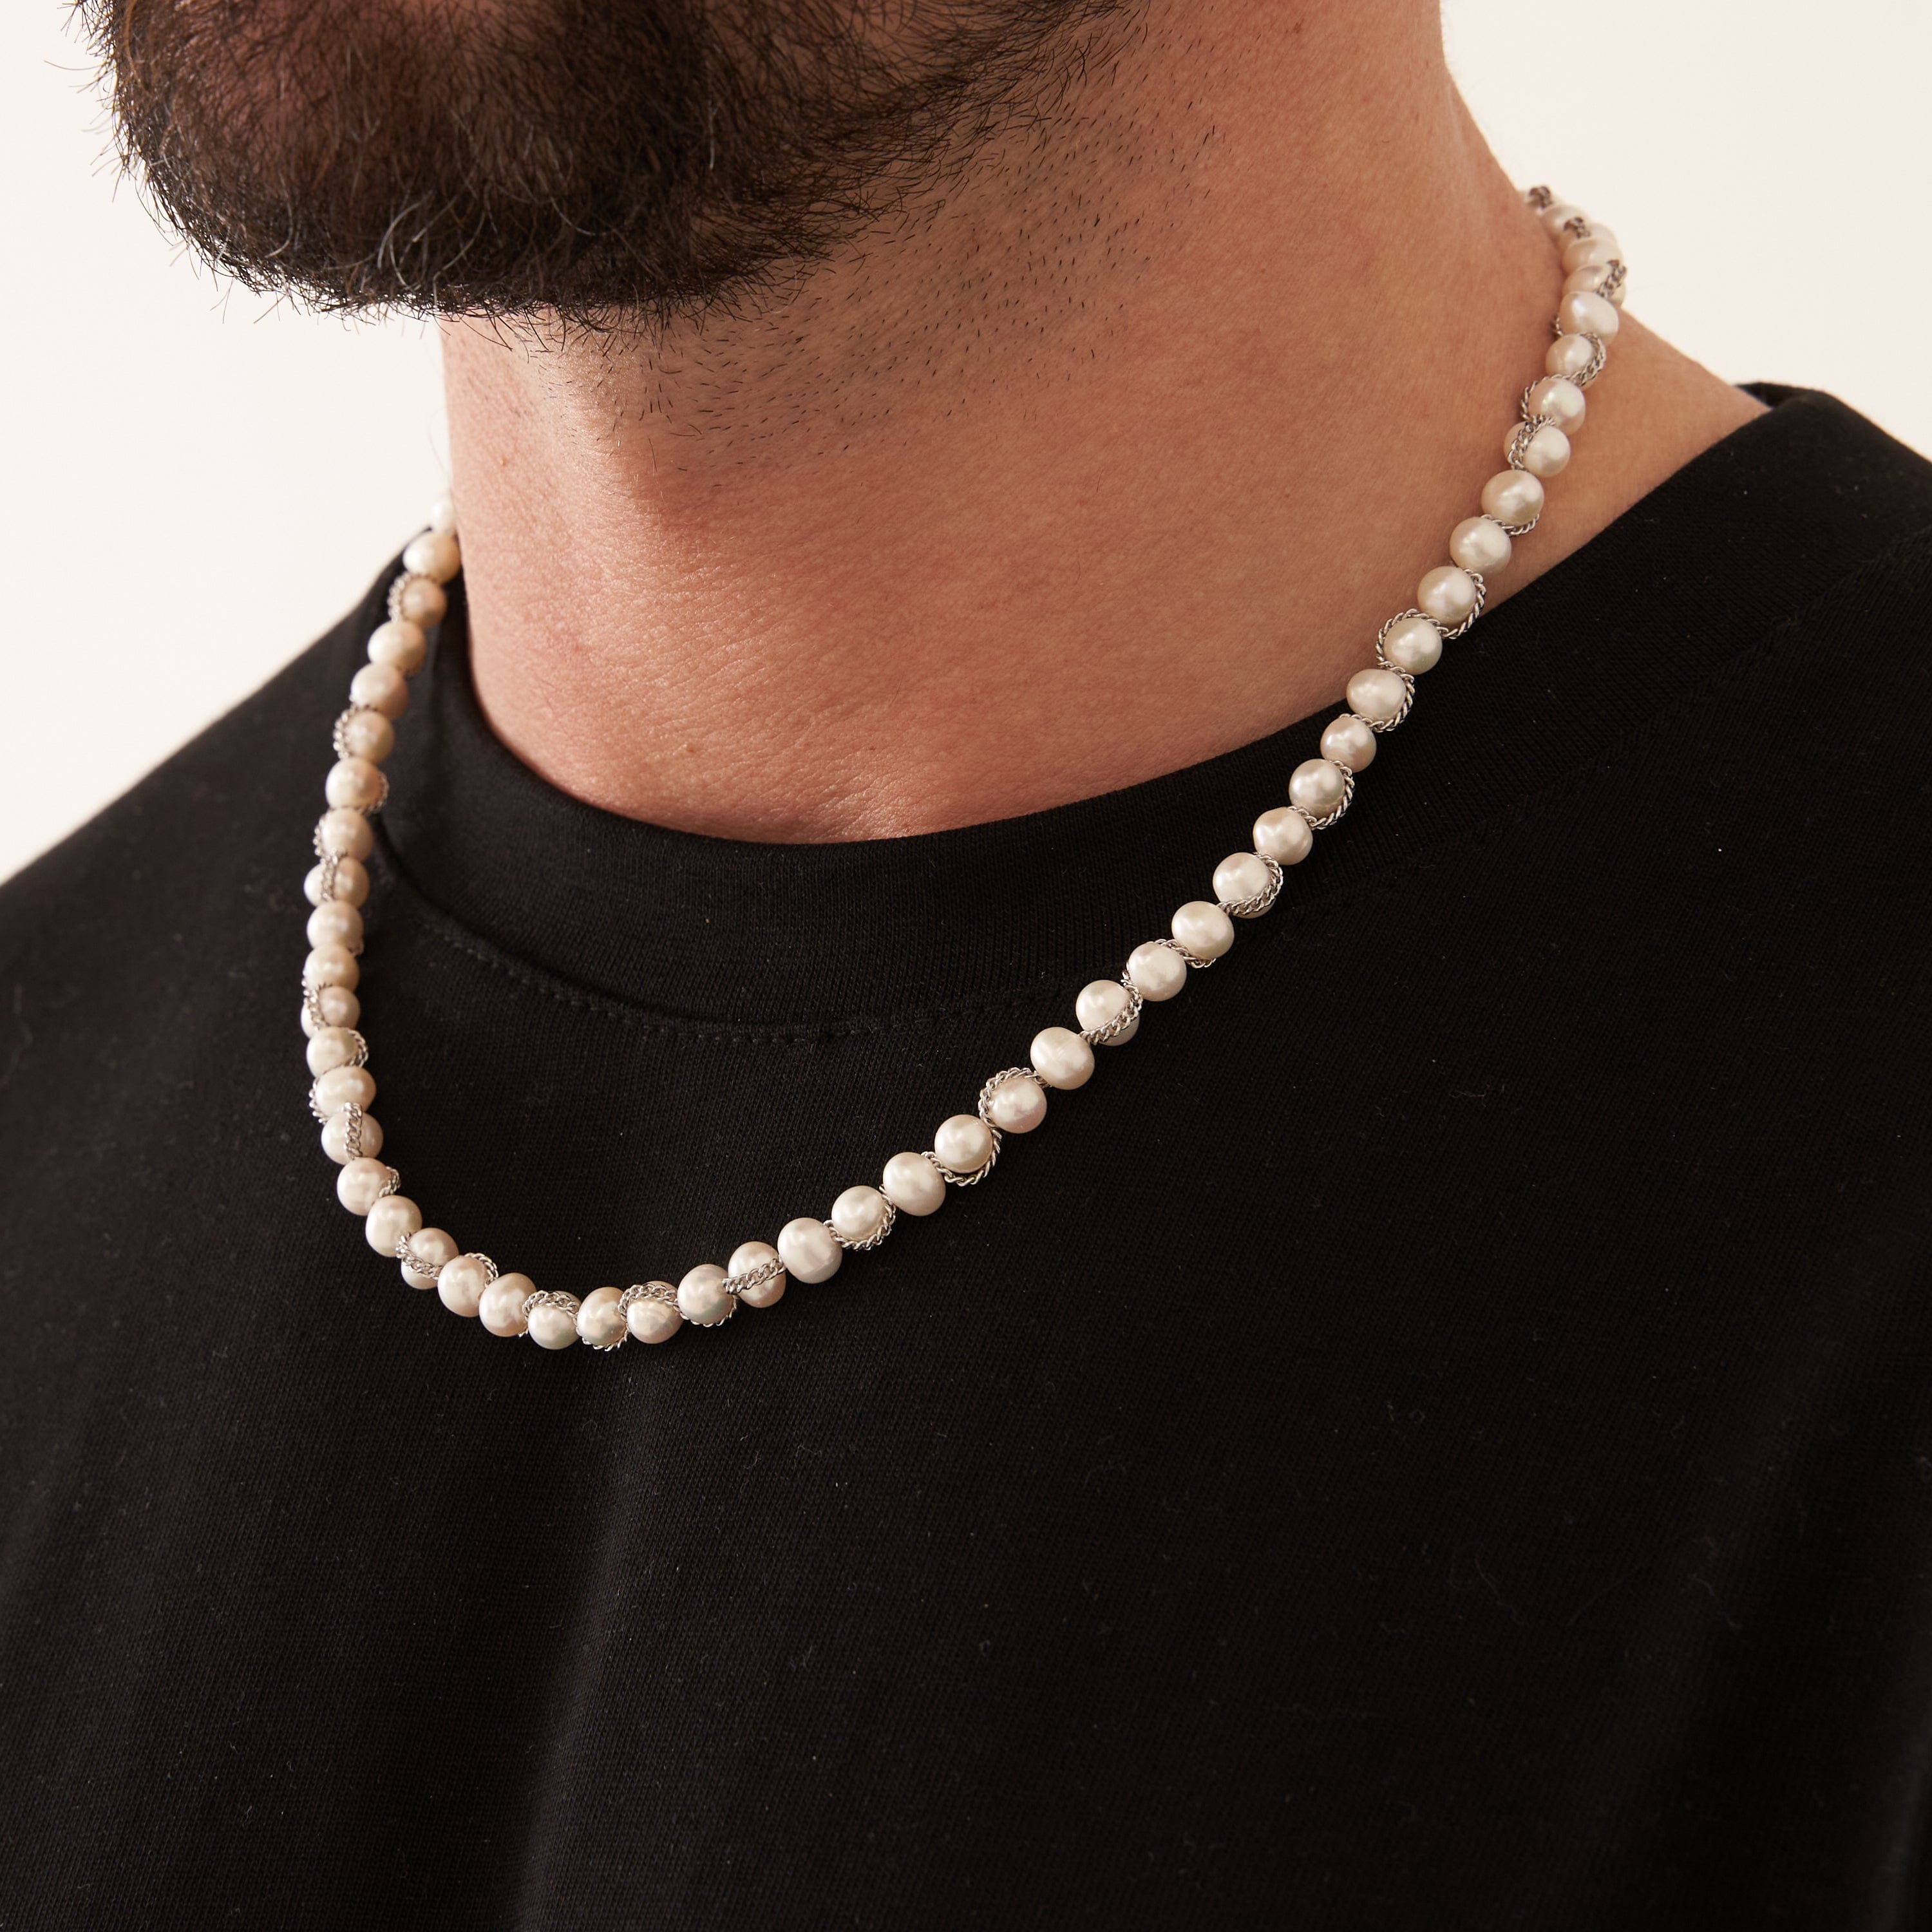 Chain Wrap Real Pearl Necklace (Silver)